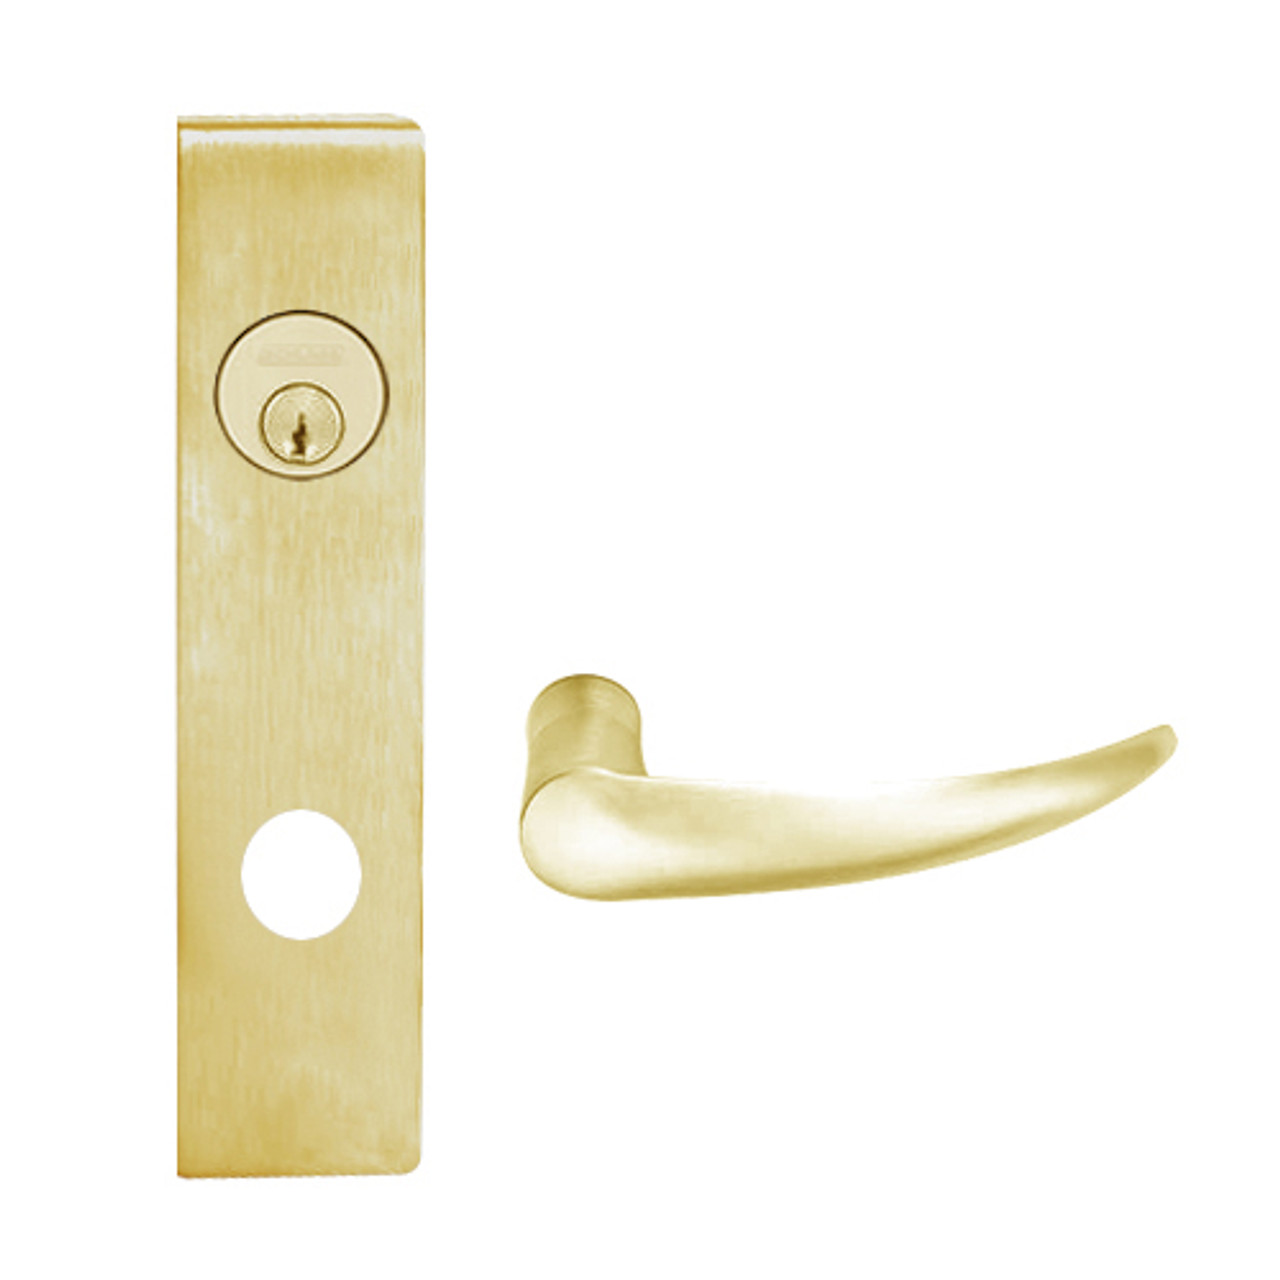 L9026L-OME-L-605 Schlage L Series Less Cylinder Exit Lock with Cylinder Commercial Mortise Lock with Omega Lever Design in Bright Brass